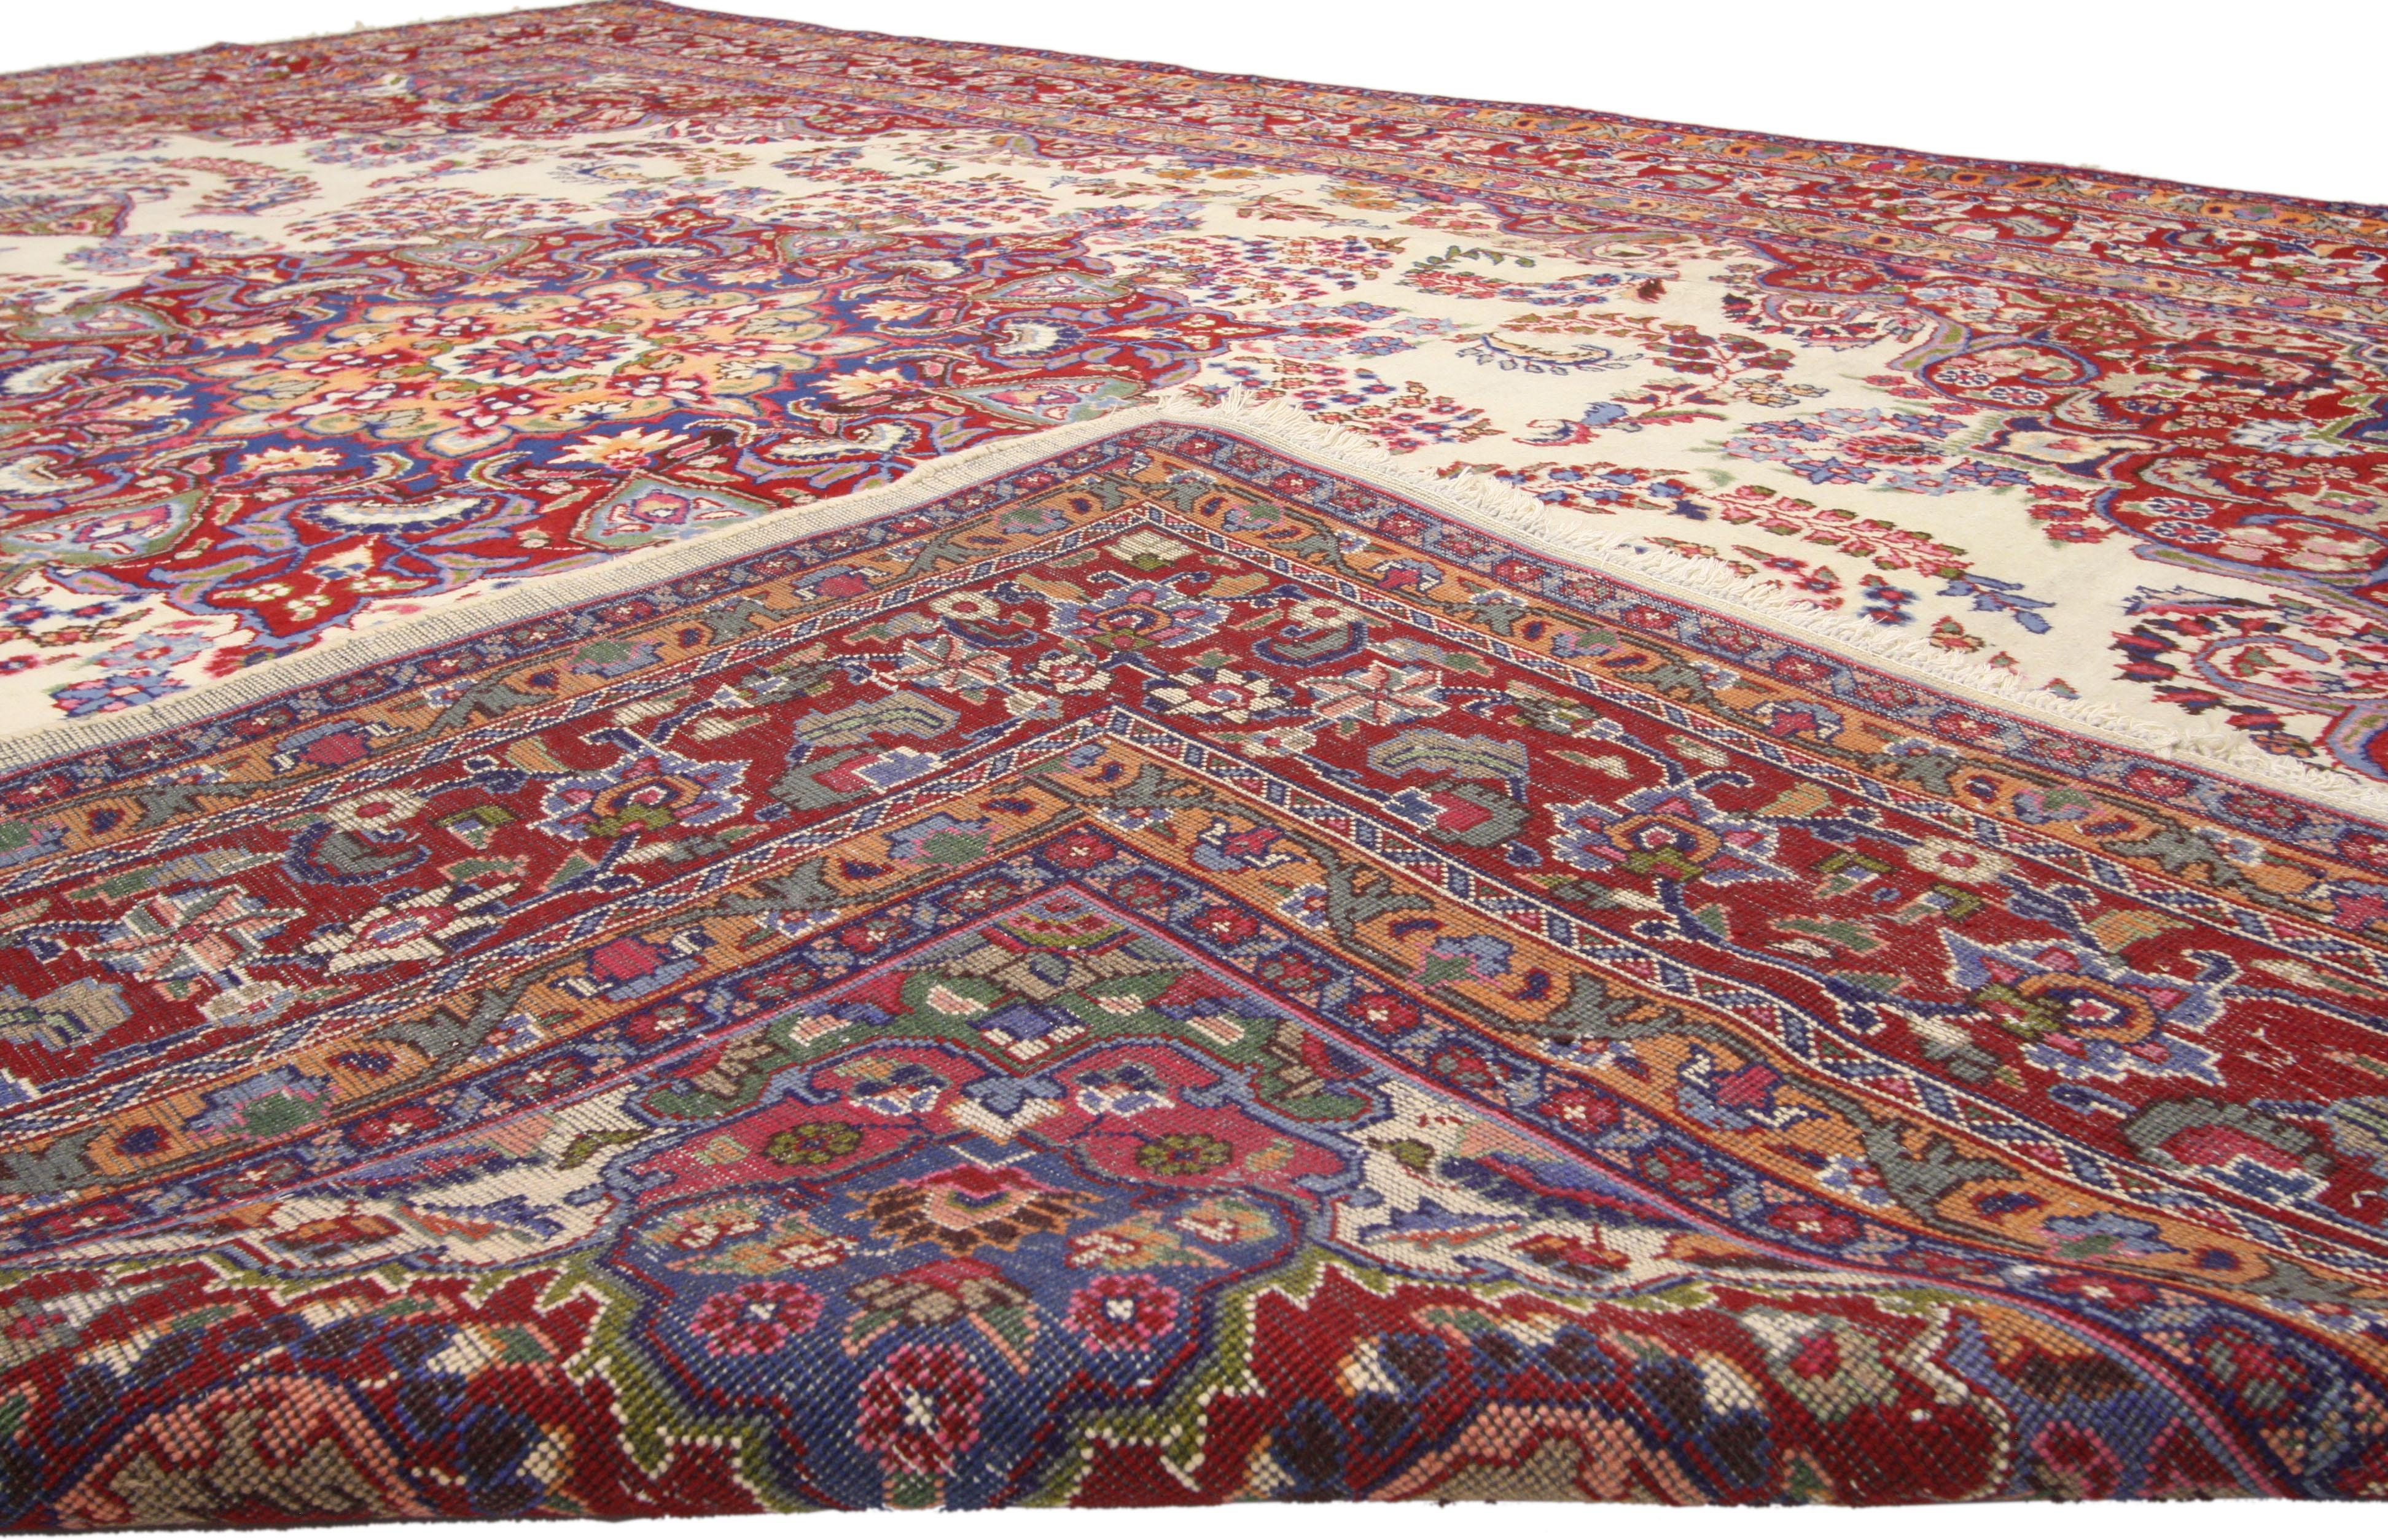 Vintage Persian Khorassan Area Rug with Traditional Style In Excellent Condition For Sale In Dallas, TX